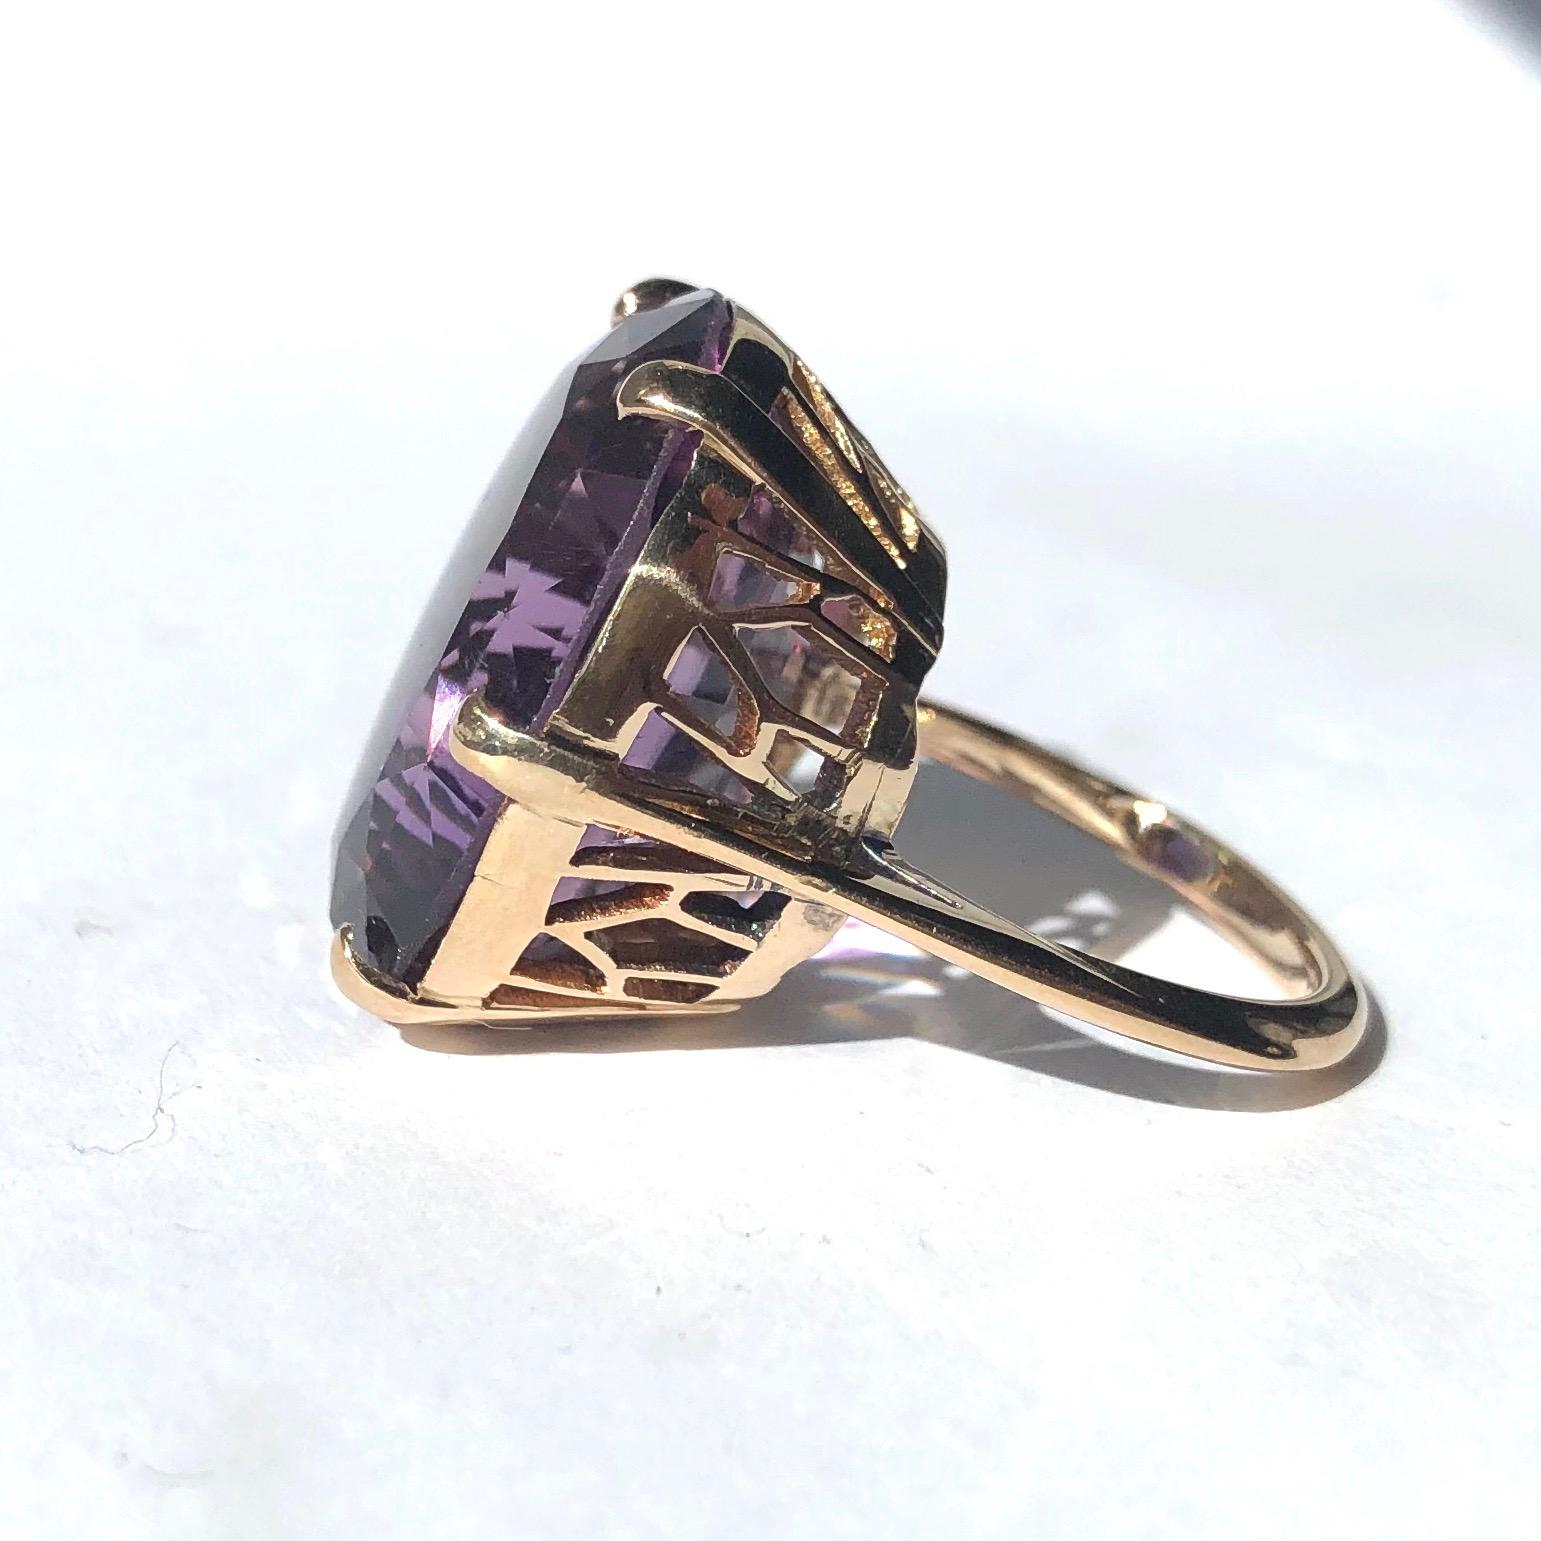 The oval amethyst stone is gorgeous and bright, the stone is set in a simple claw setting and the gallery is open with a classic Art Deco style design. 

Ring Size: K 1/2 or 5 1/2 
Stone Dimensions: 22x18mm 
Height From Finger: 12mm

Weight: 10g